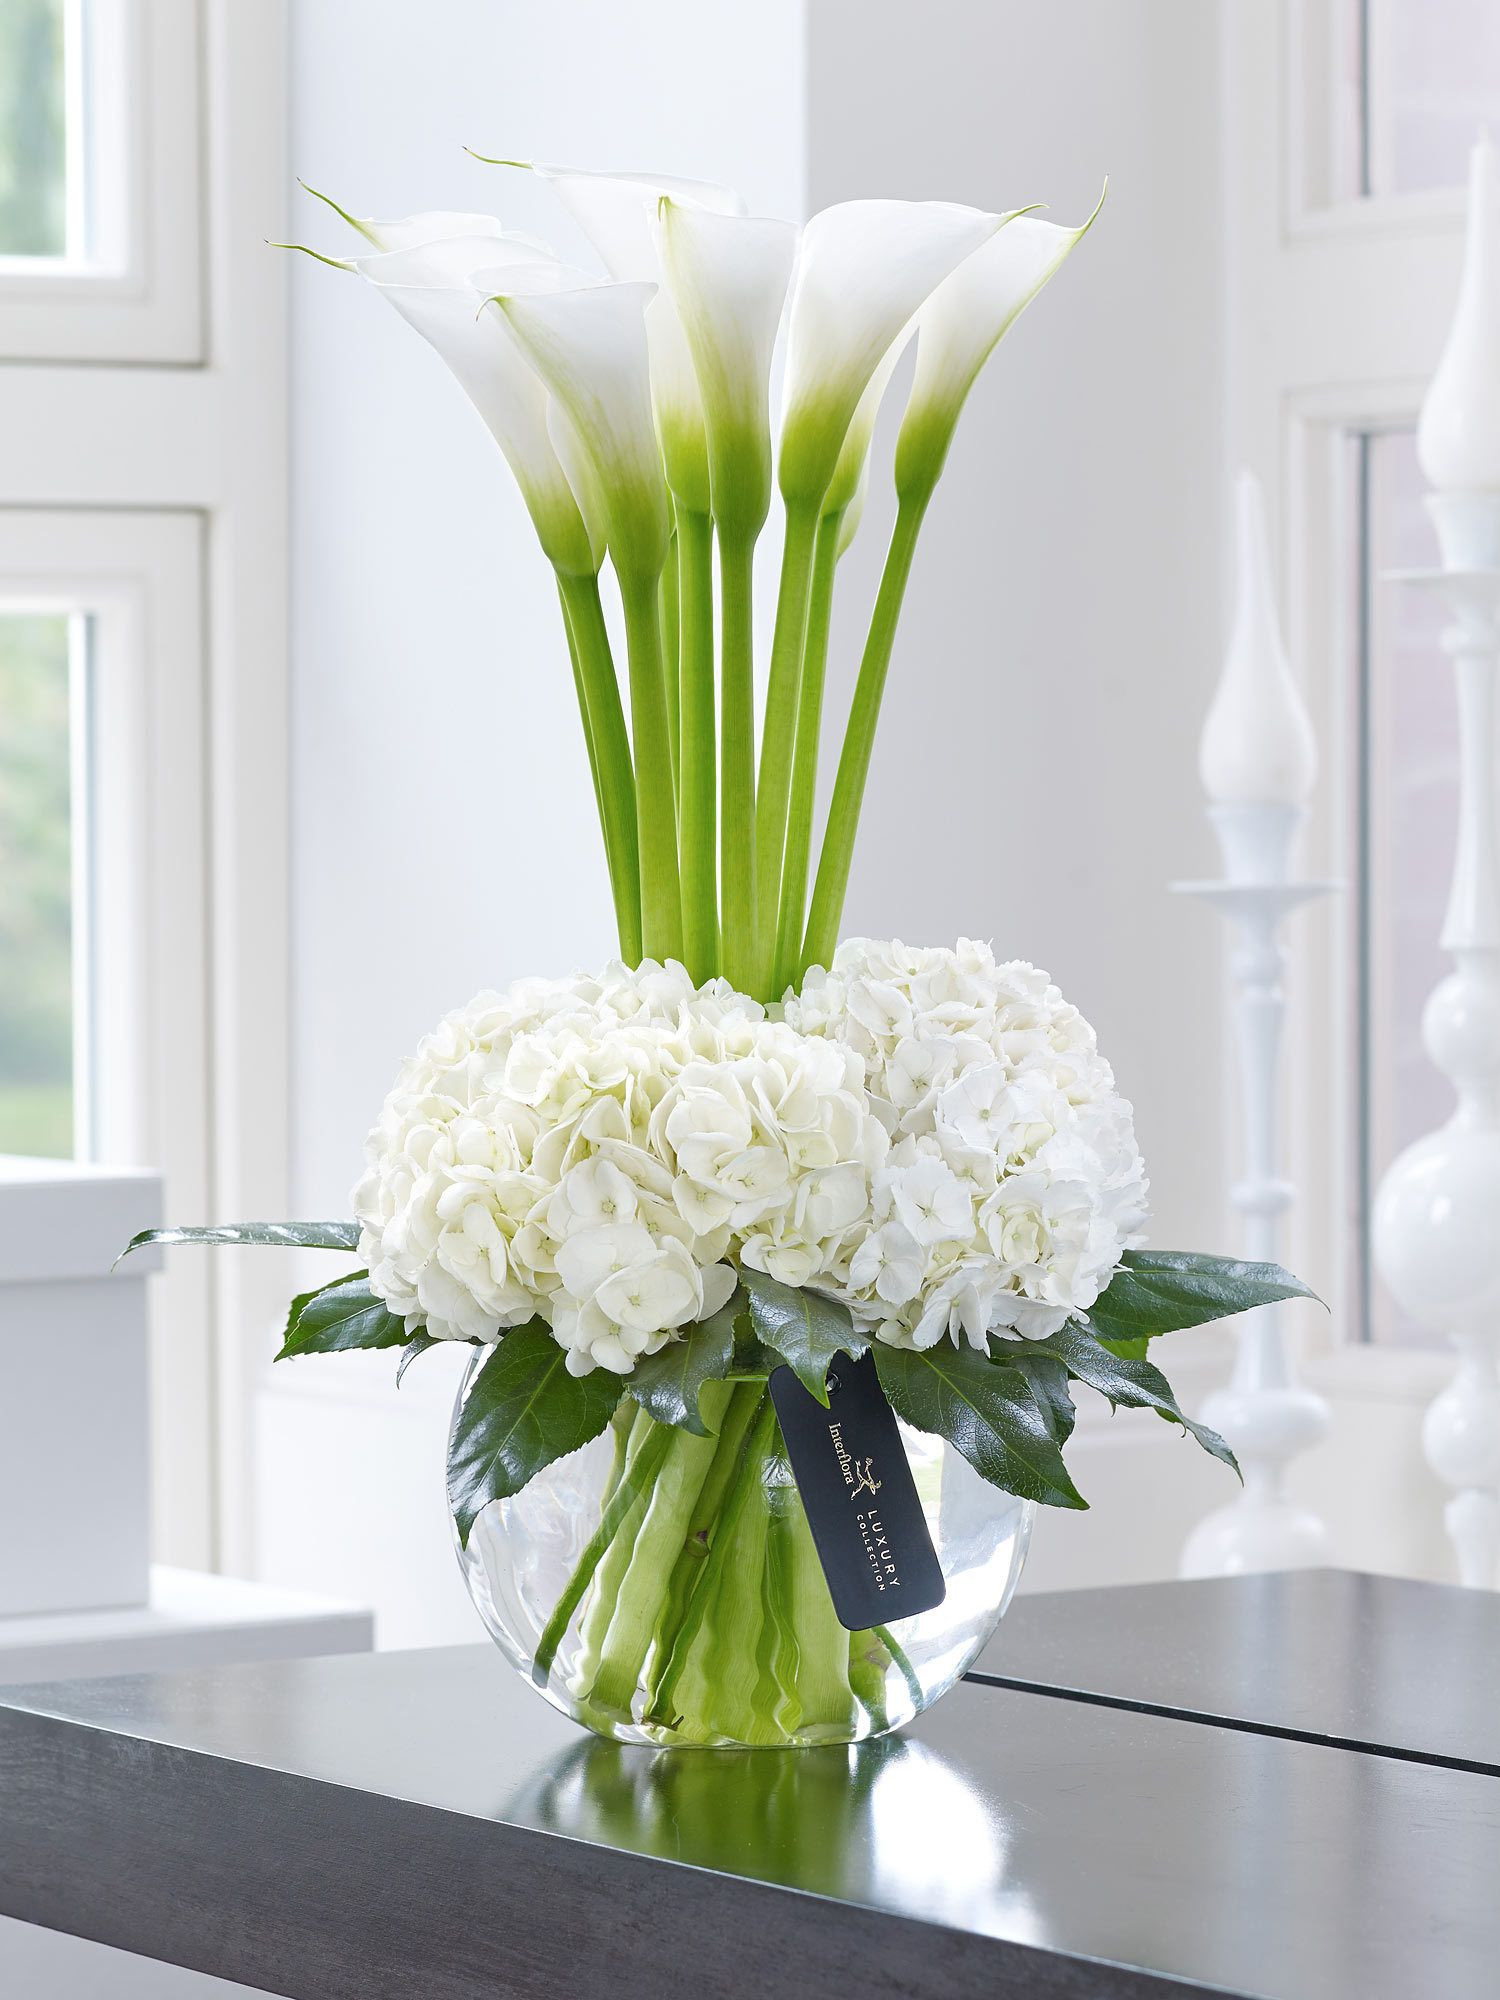 14 Fashionable Calla Lily Tall Vase 2024 free download calla lily tall vase of barbarasangi jane the florist ltd luxury calla lily and for barbarasangi jane the florist ltd luxury calla lily and hydrangea vase interflora